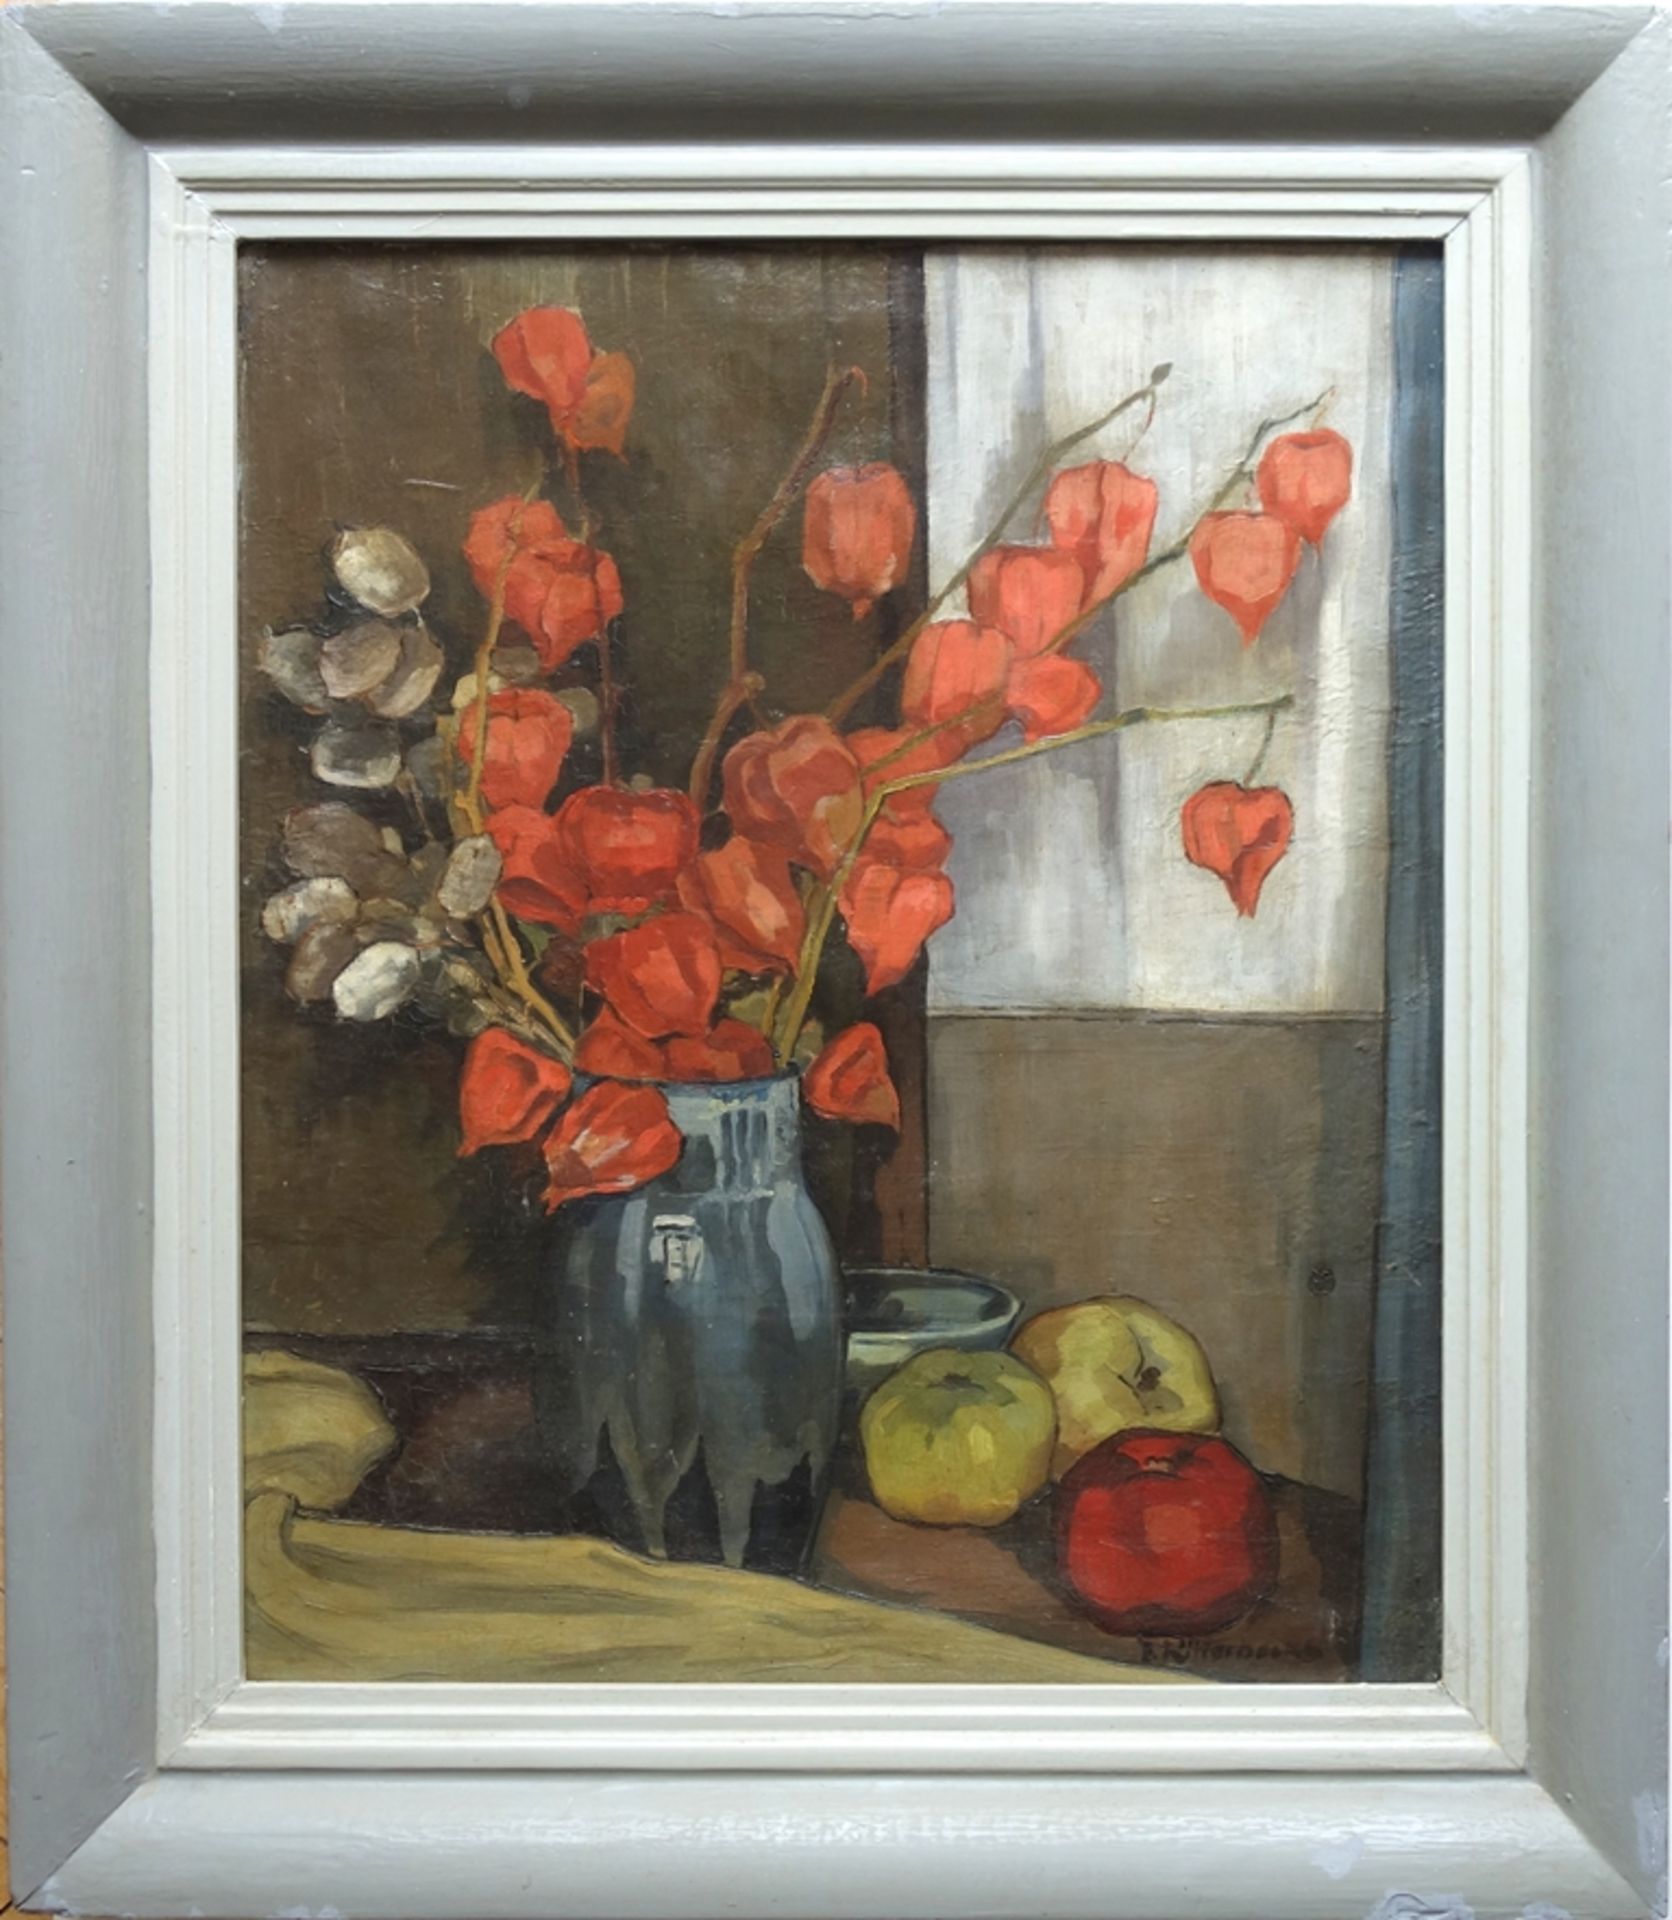 E. Ritterbecks, "Still Life with Silver Leaf, Lampionon Flowers and Quinces", 1920s, oil/canvas